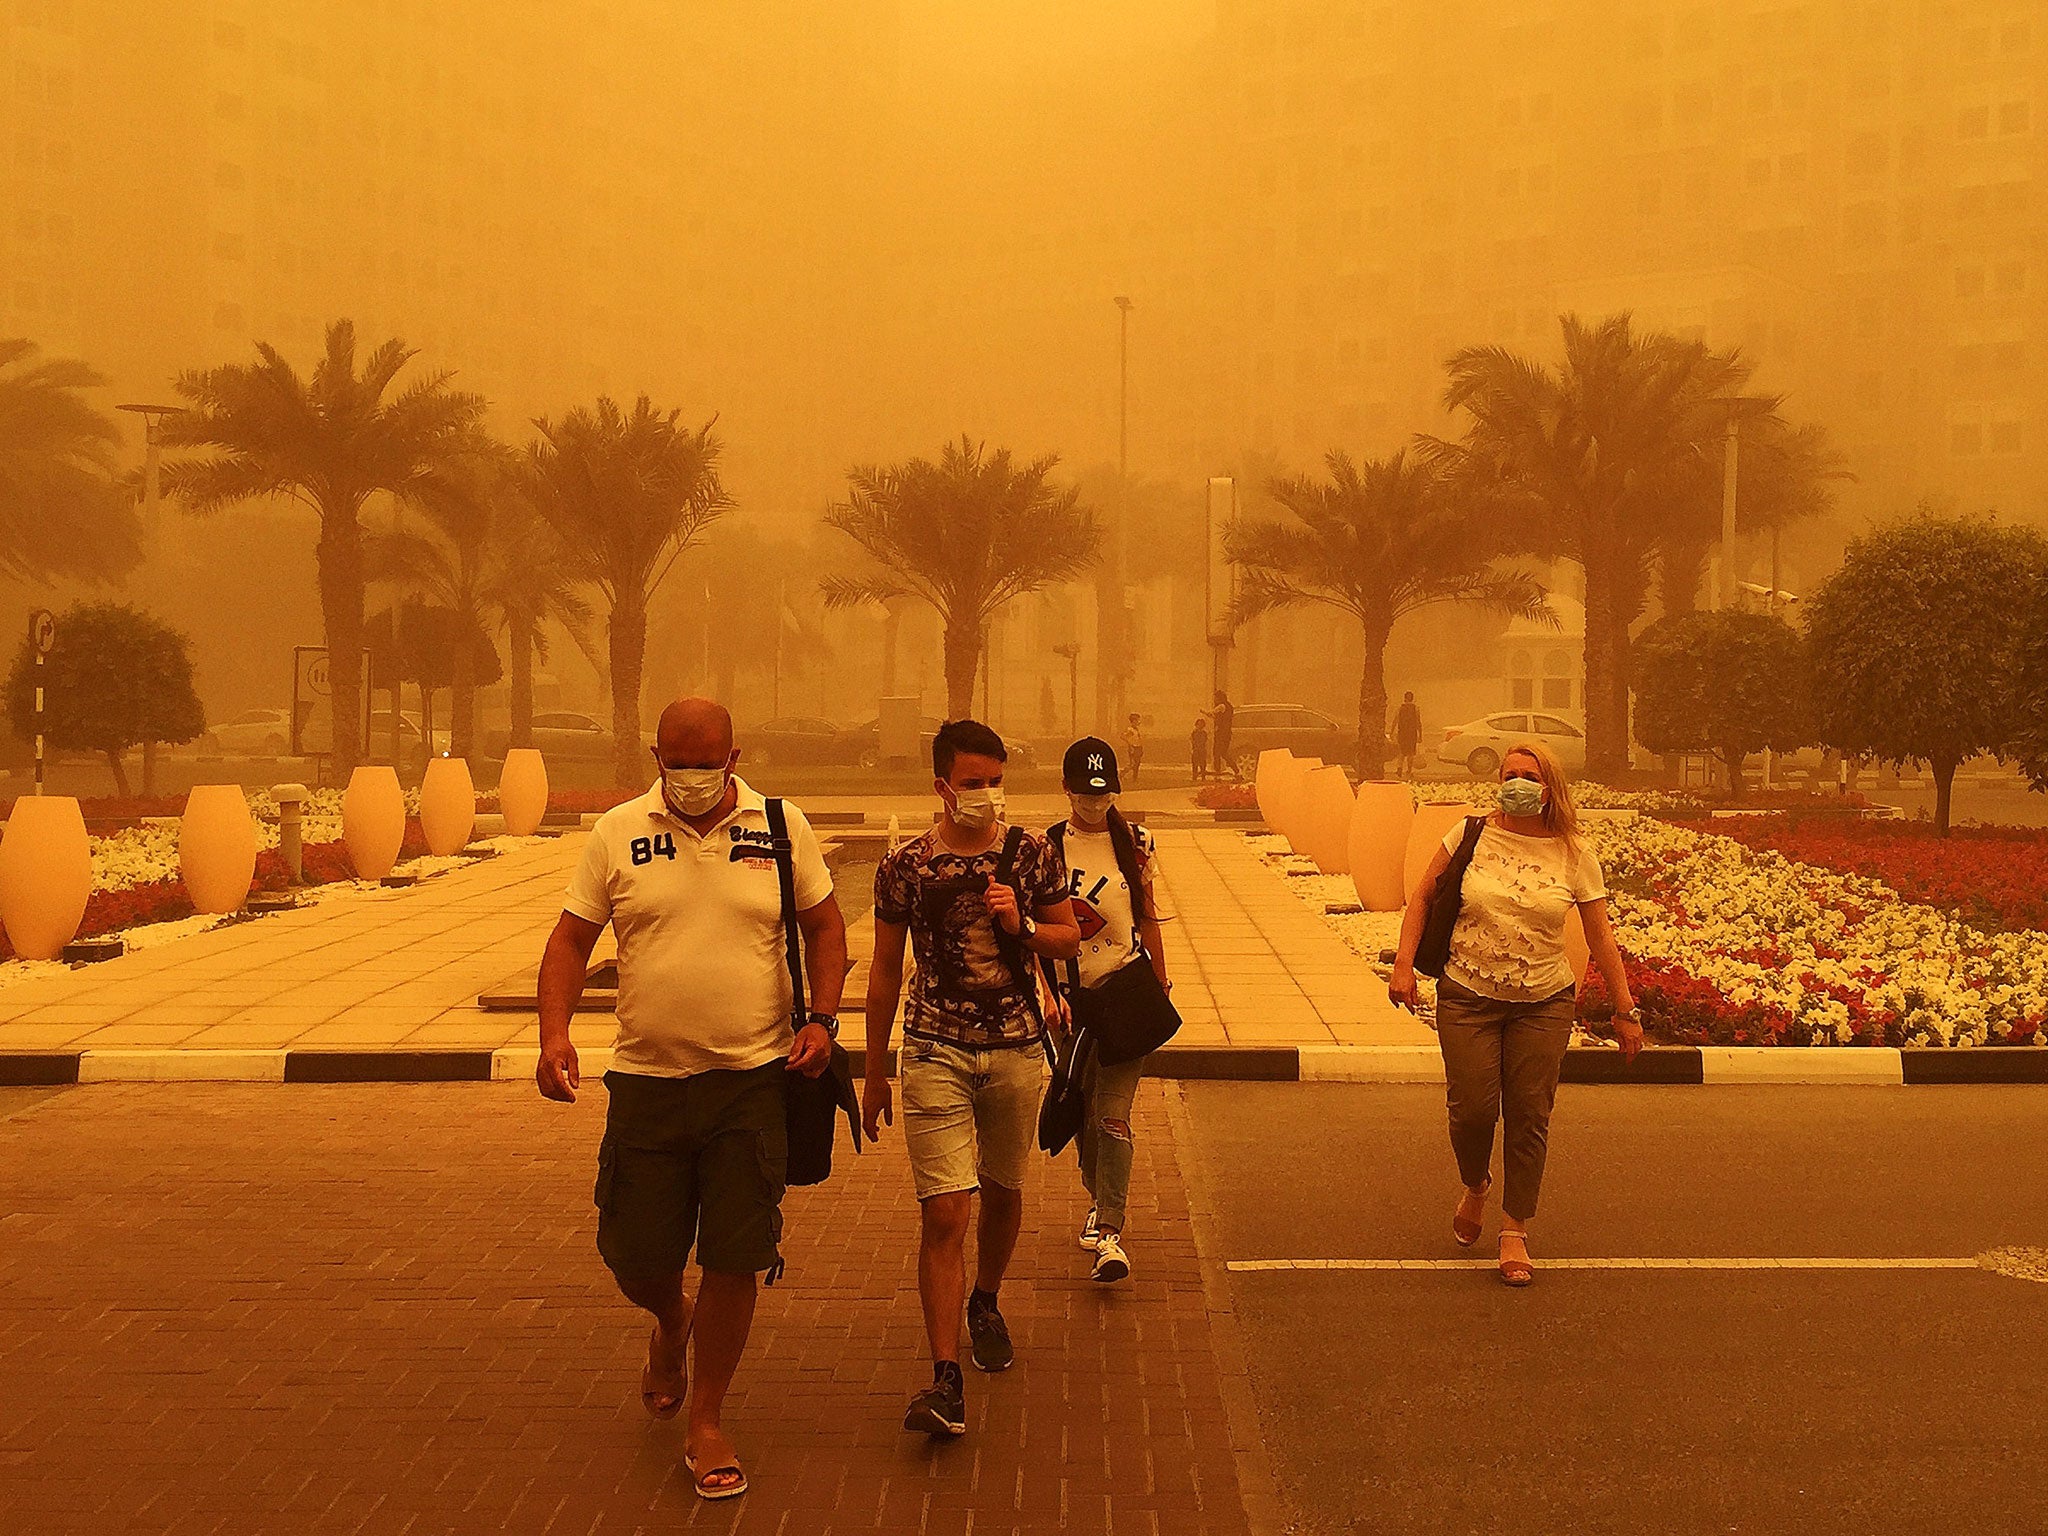 Foreigners wear medical masks as they walk in a street in Dubai amid a sandstorm that engulfed the city